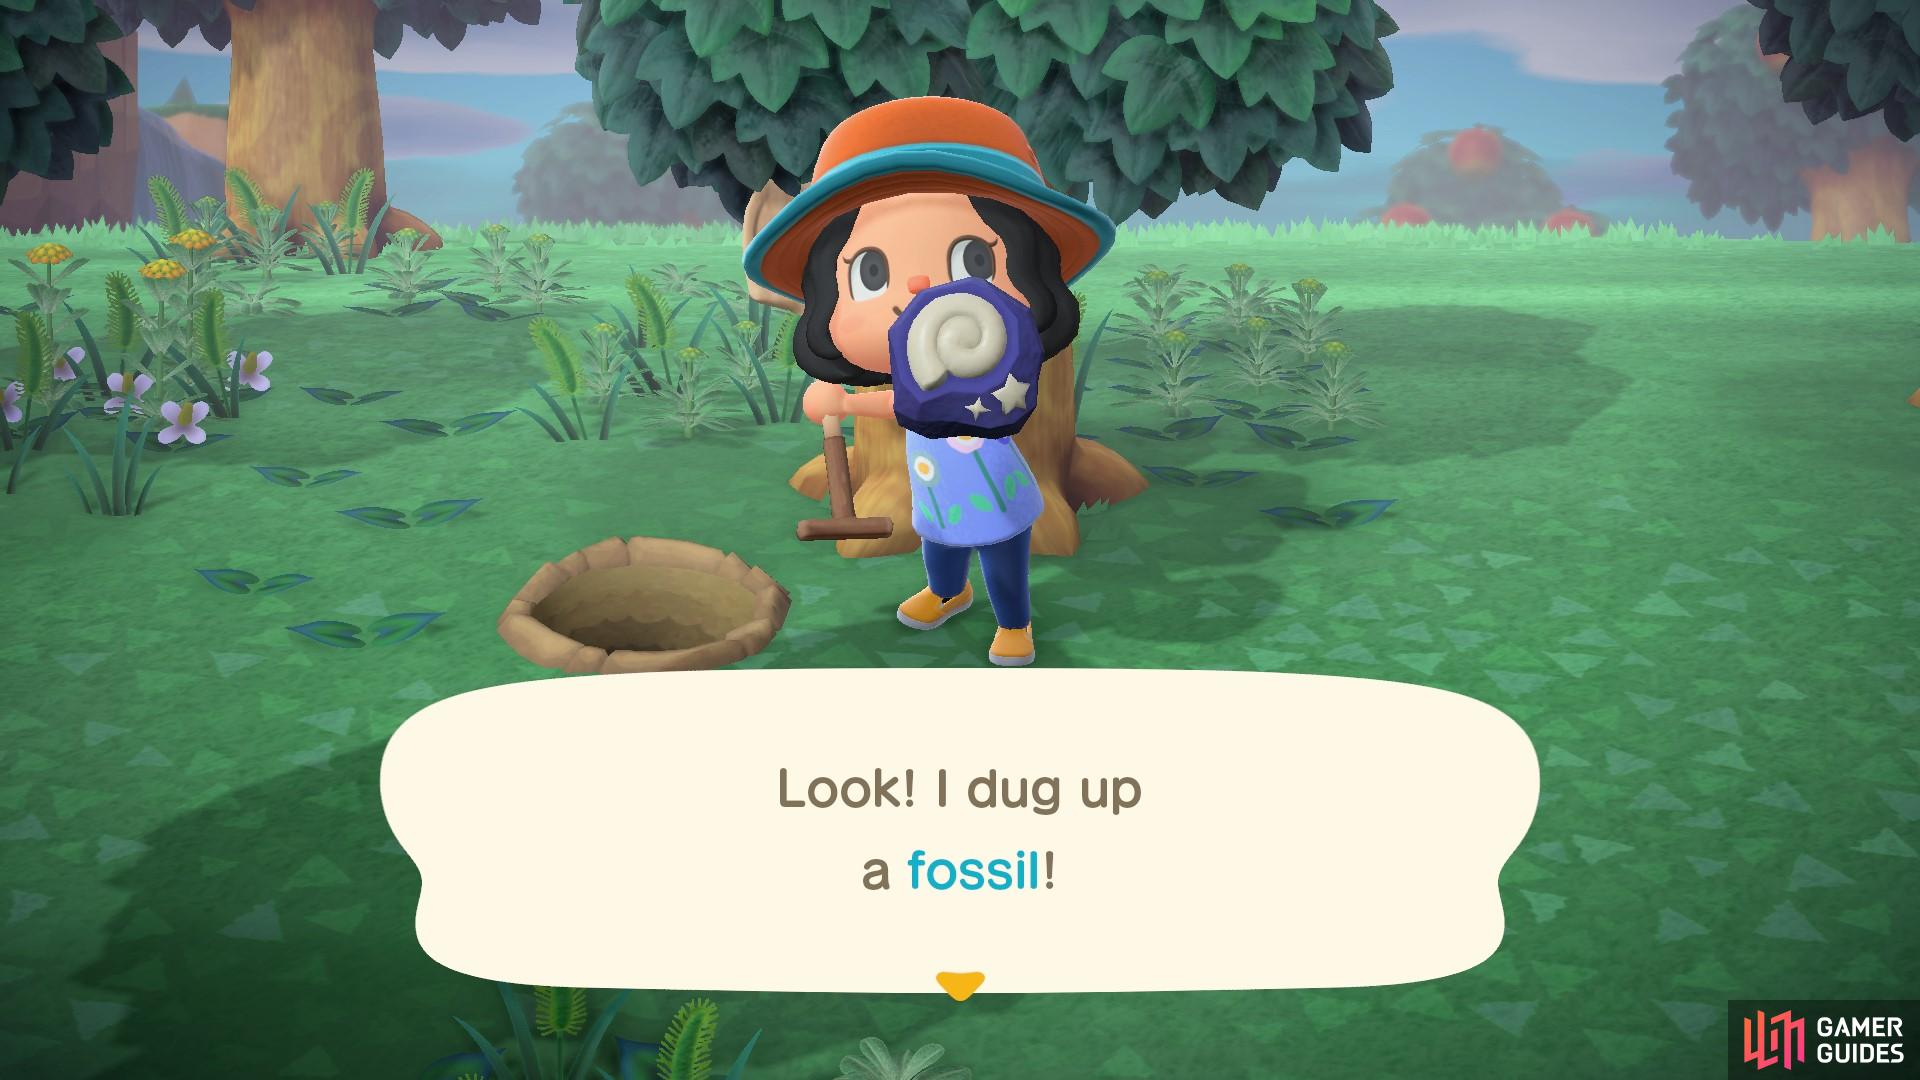 You’ll need to get fossils assessed by Blathers in order to identify it.